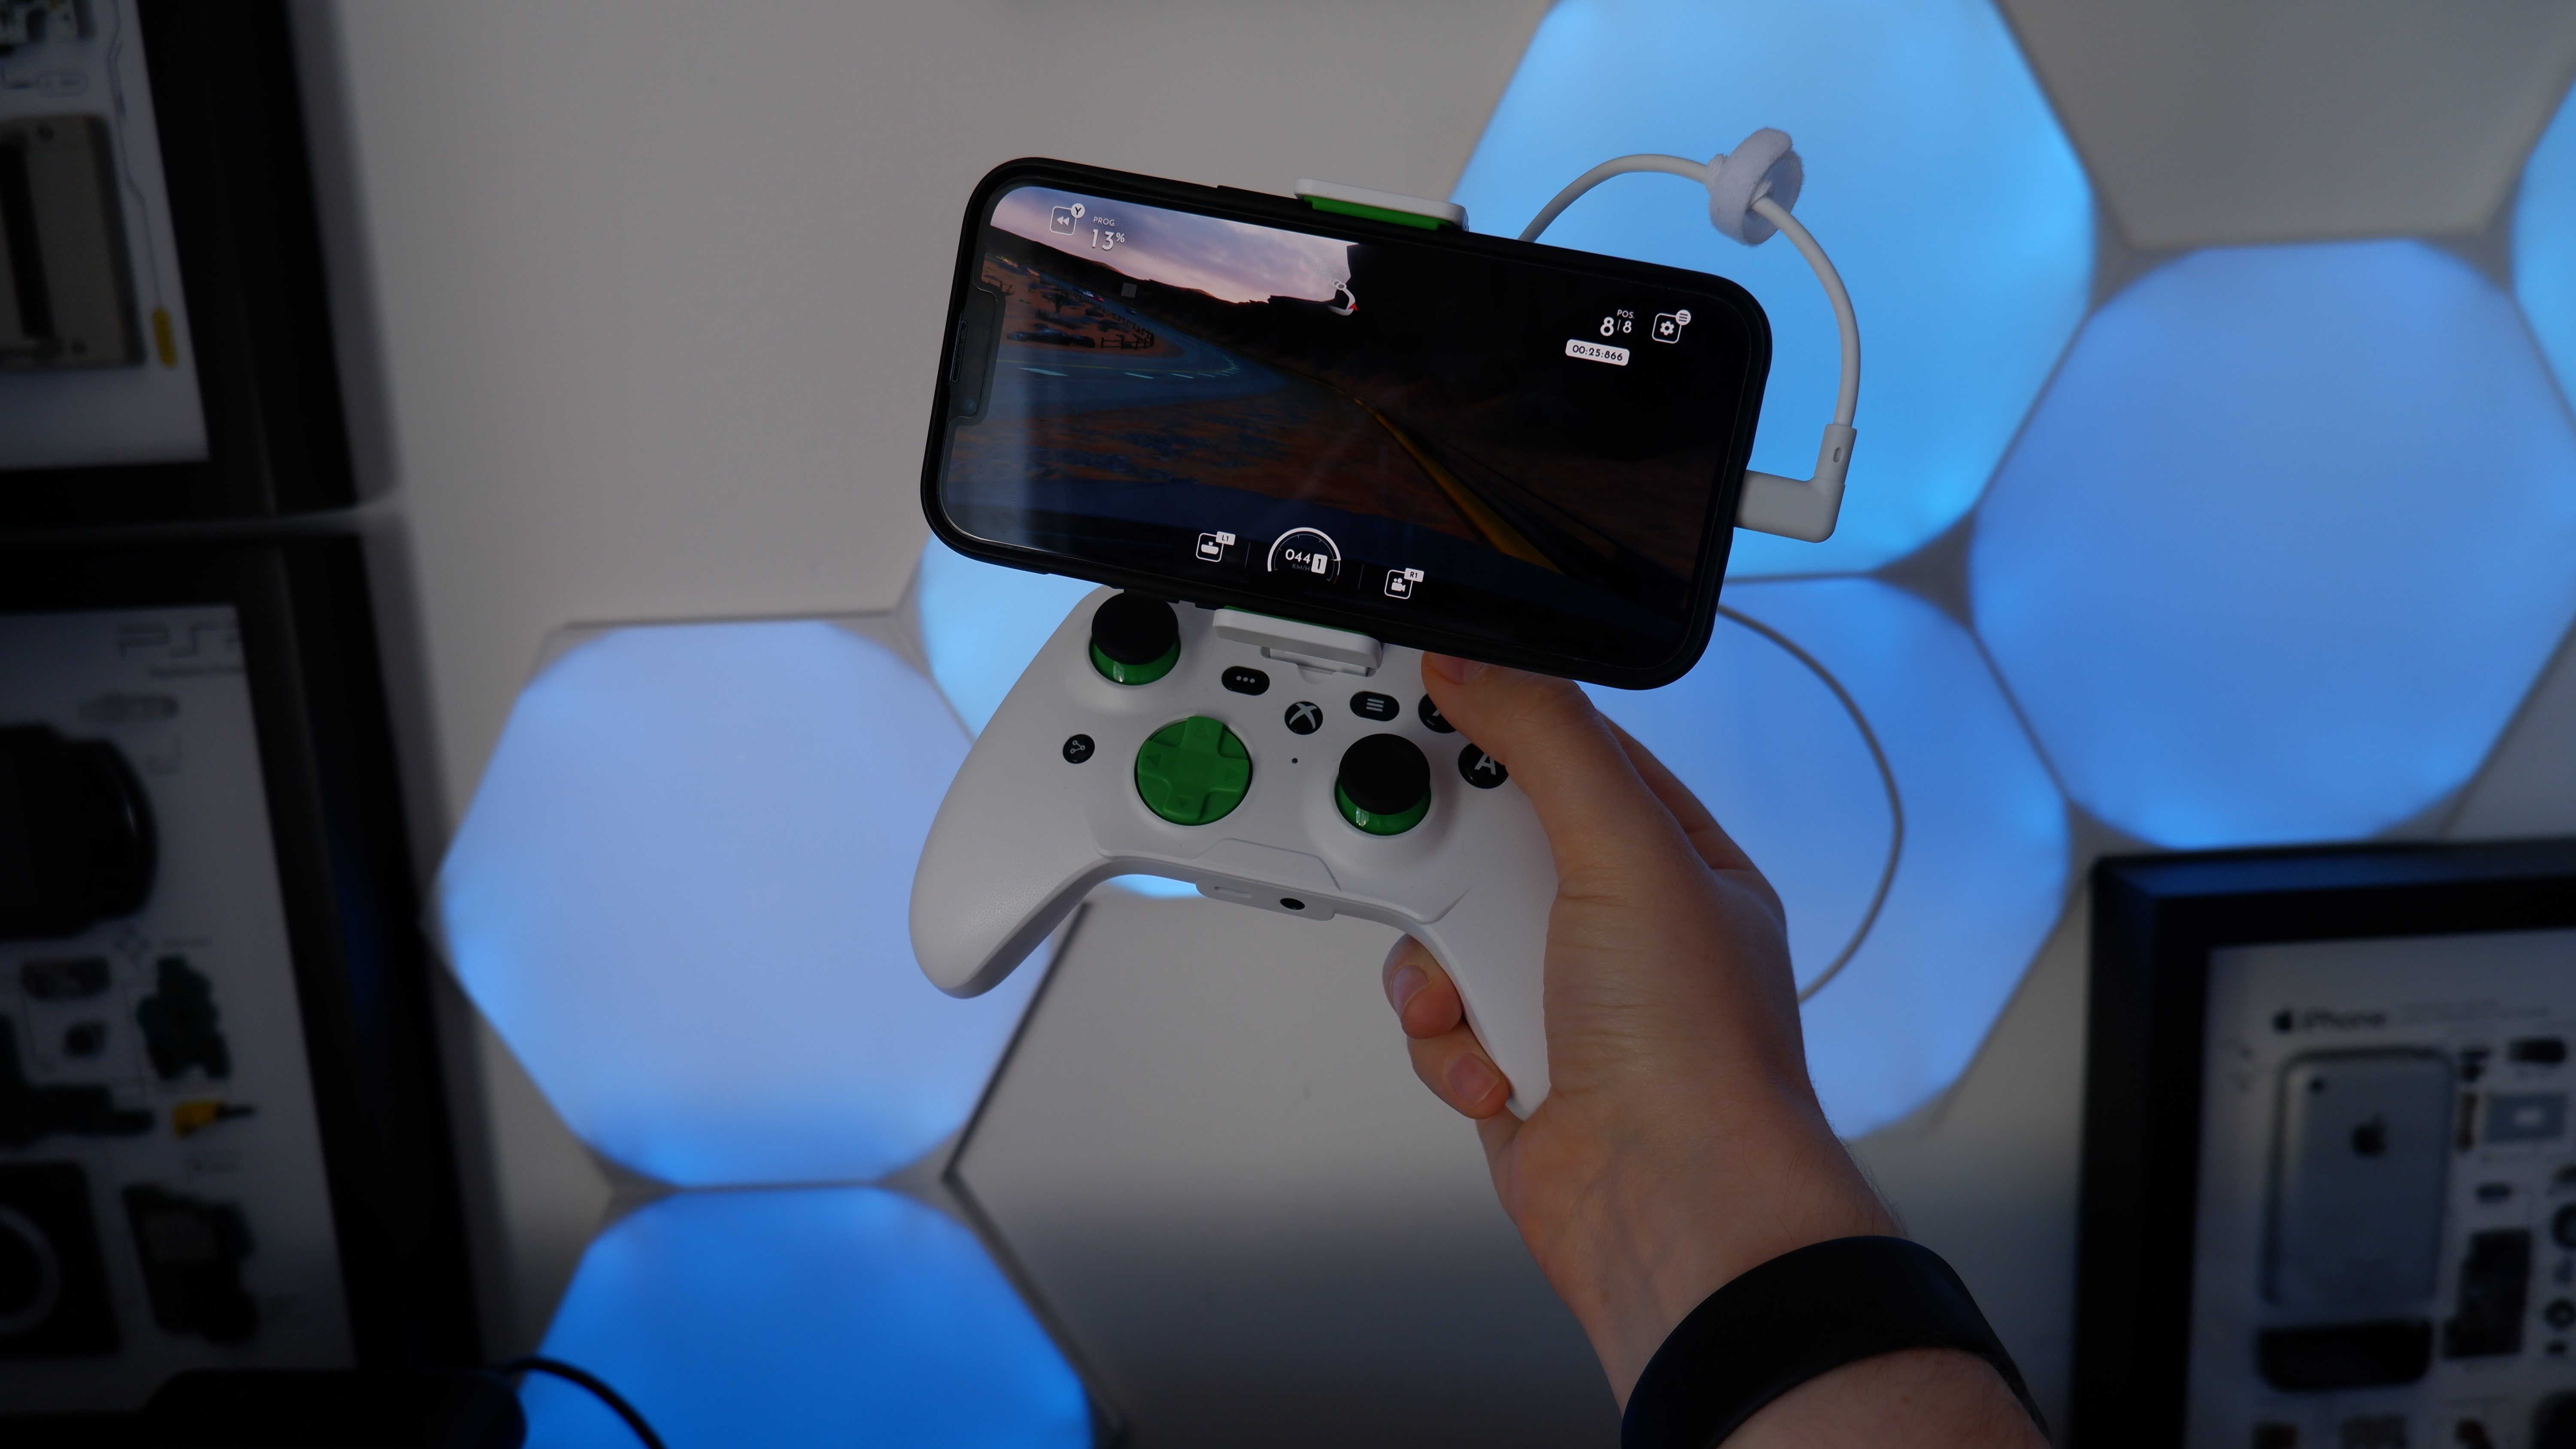 This iPhone game controller is designed for Xbox Cloud Gaming